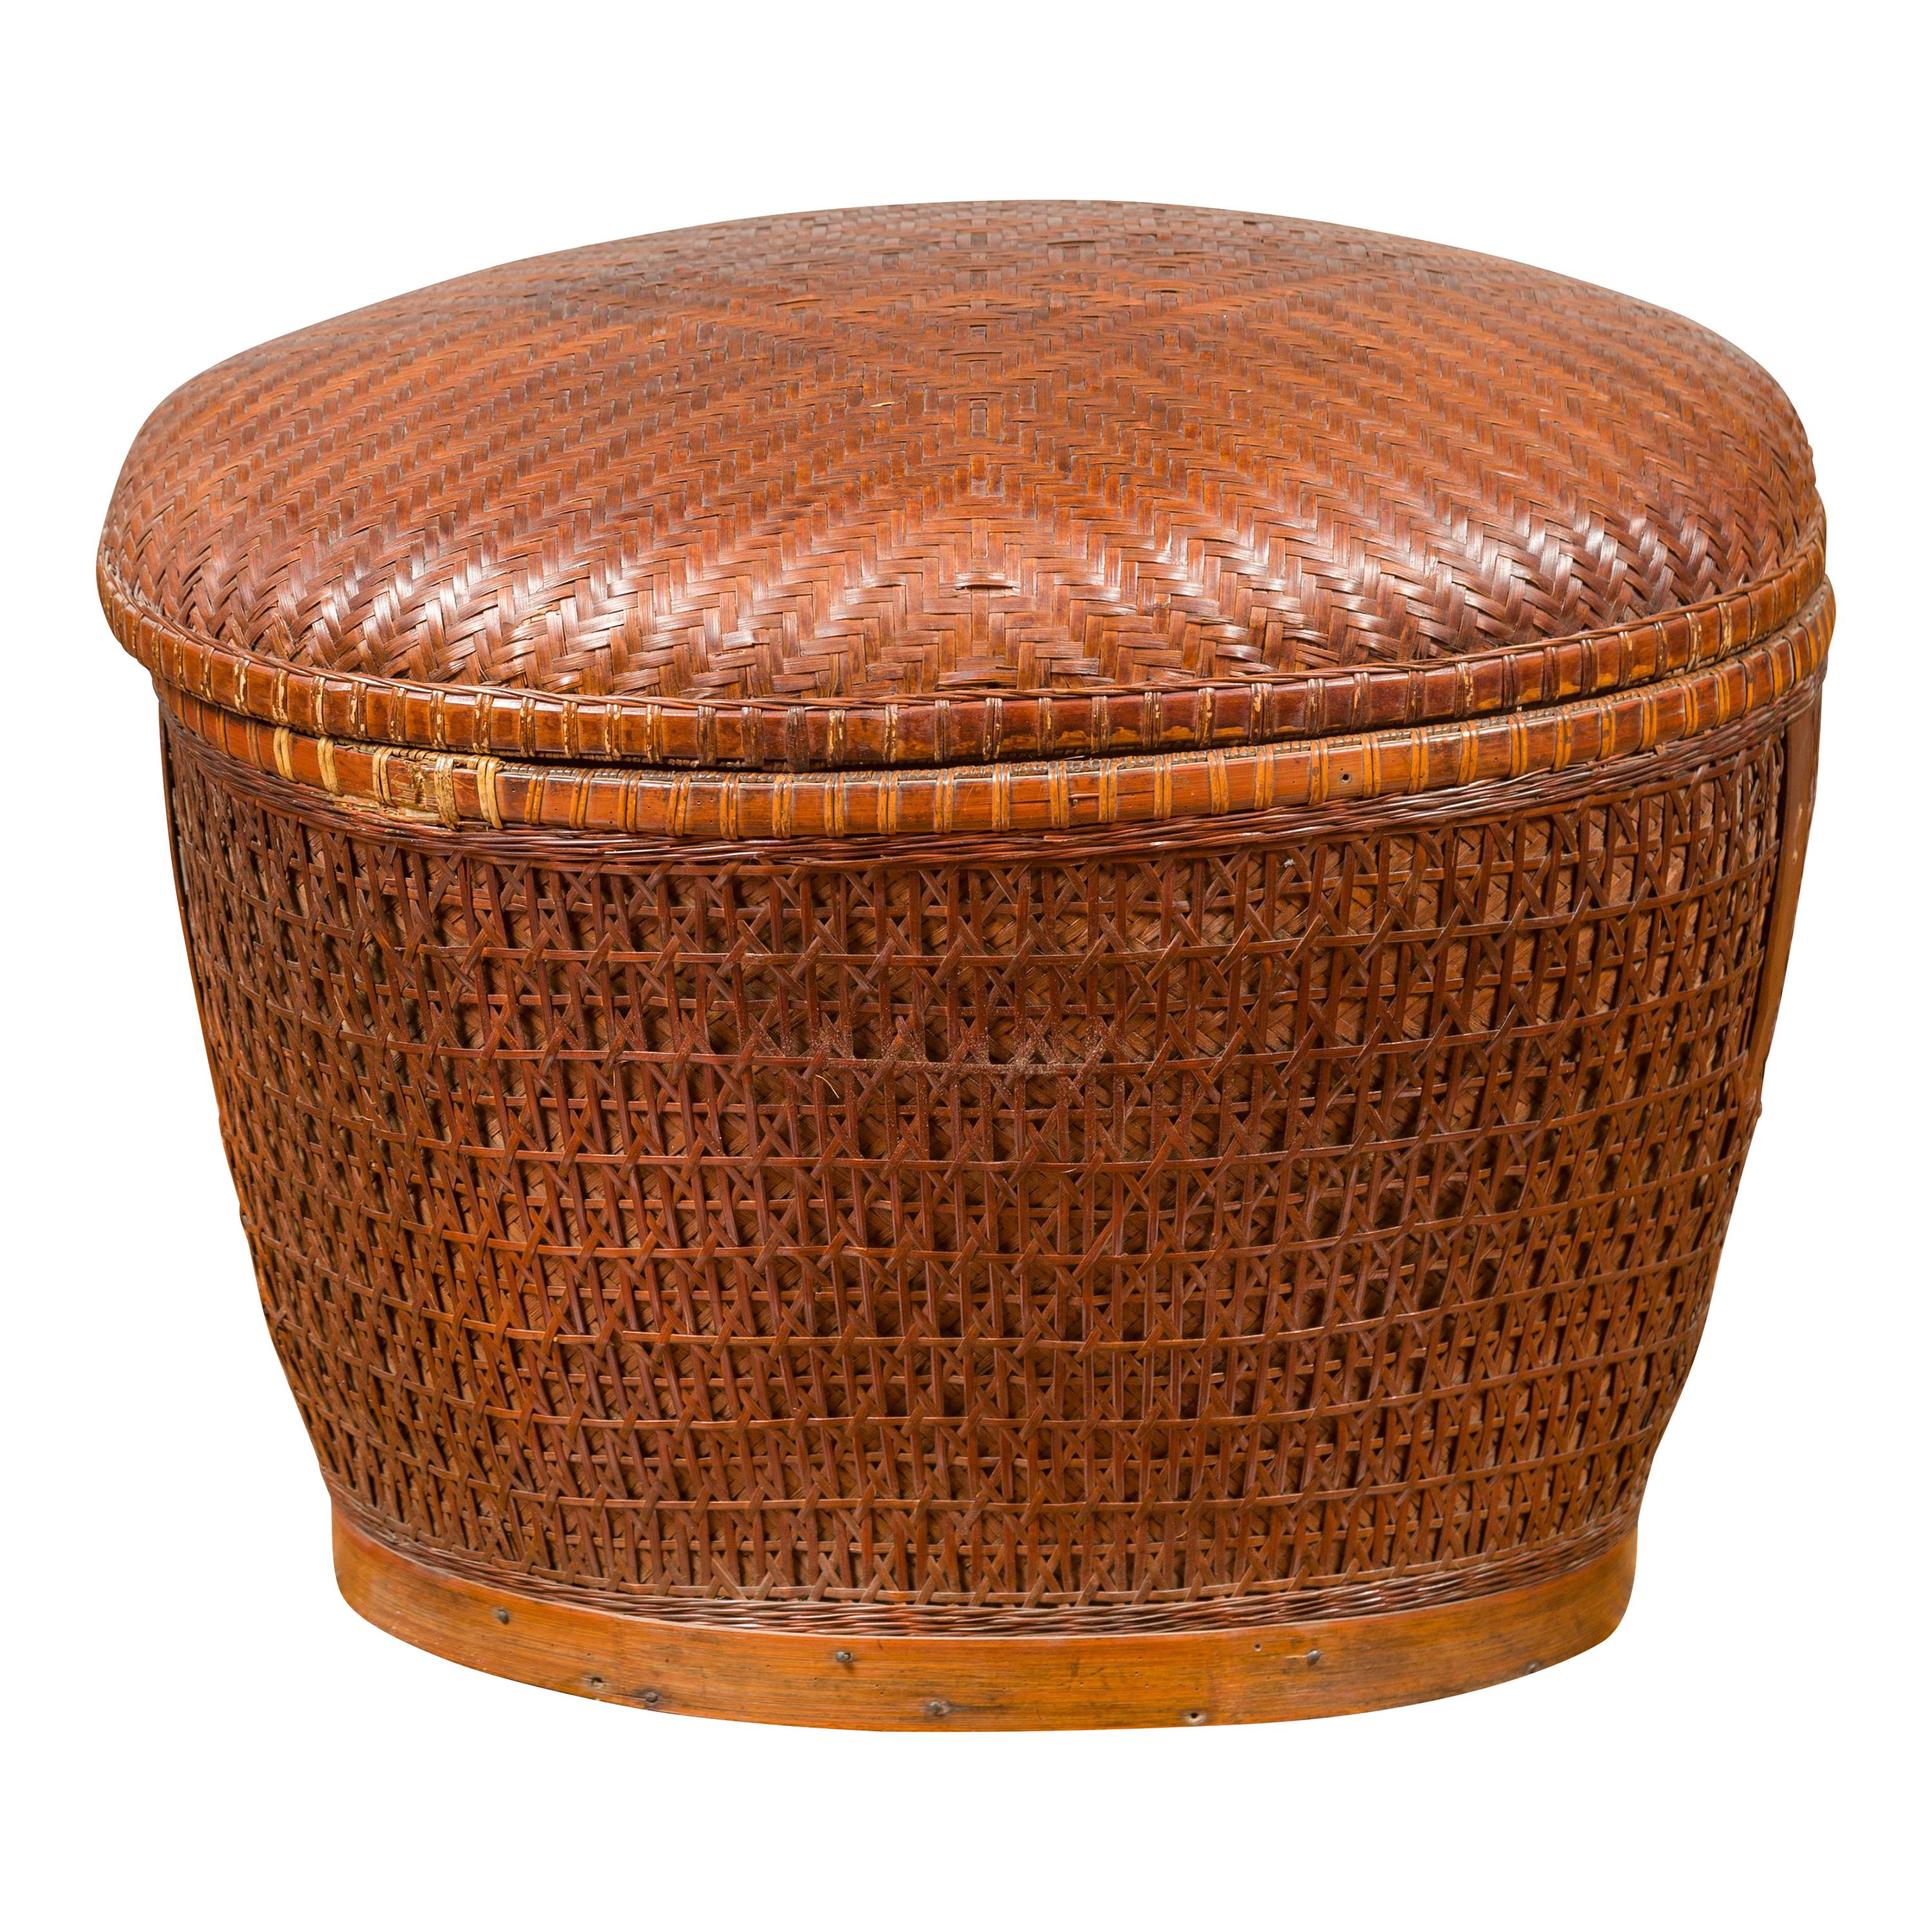 Vintage Chinese Oval Woven Rattan Basket with Lid and Geometric Motifs